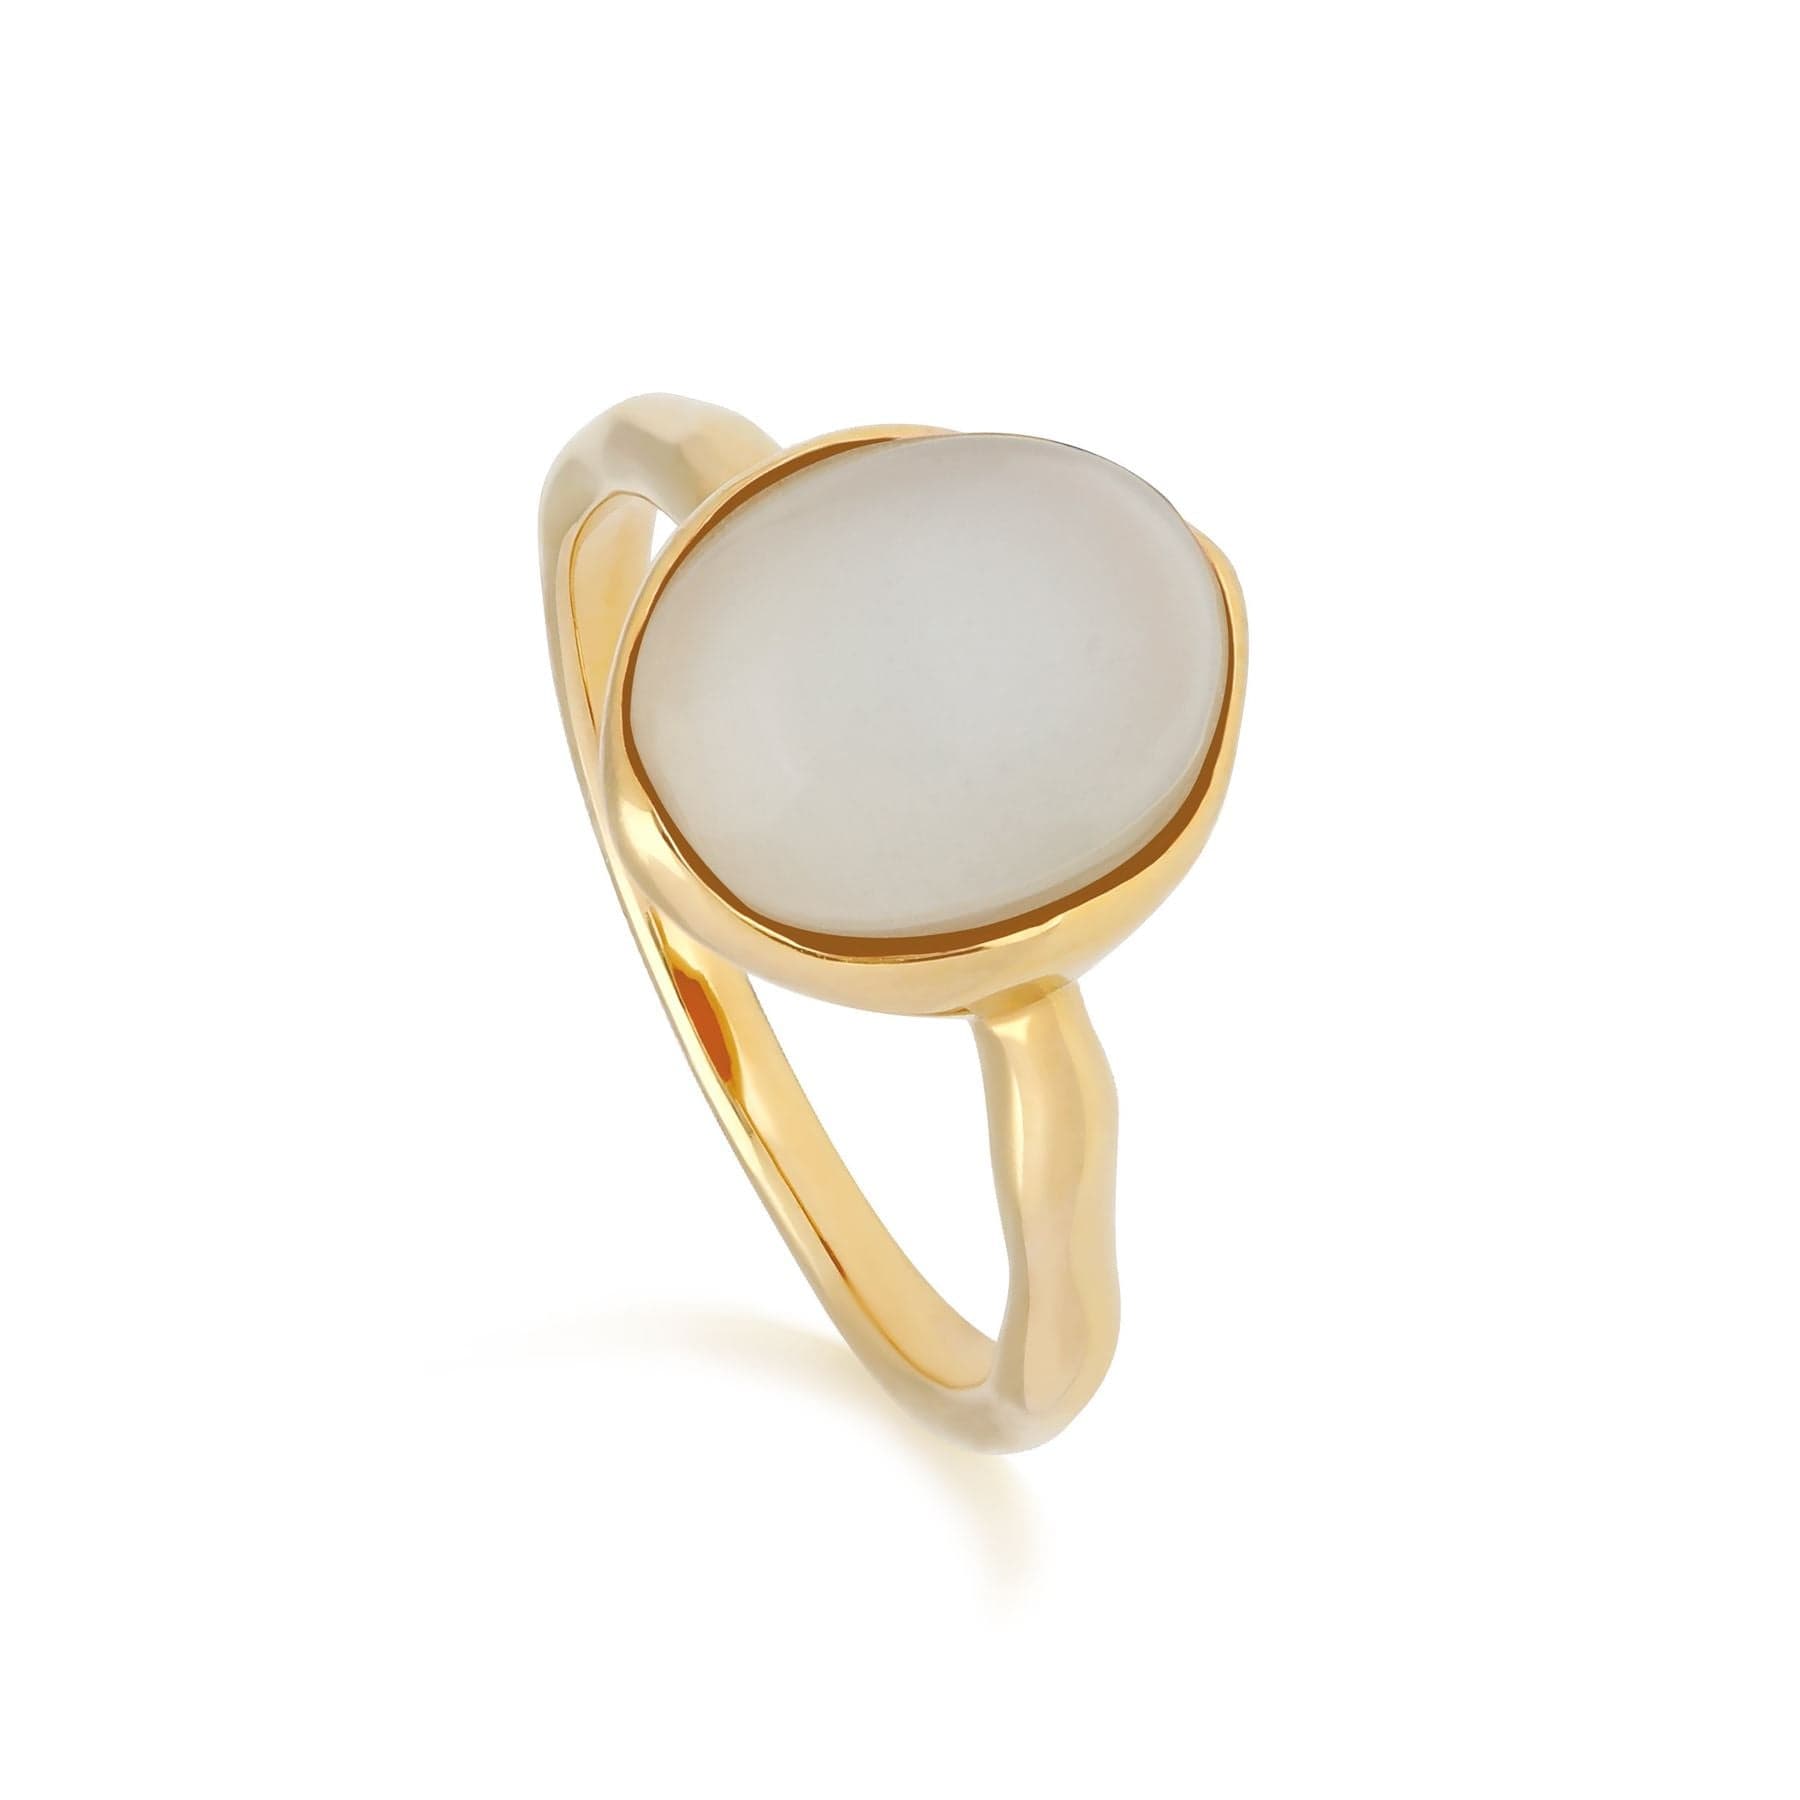 Irregular B Gem Moonstone Ring in Yellow Gold Plated Sterling Silver